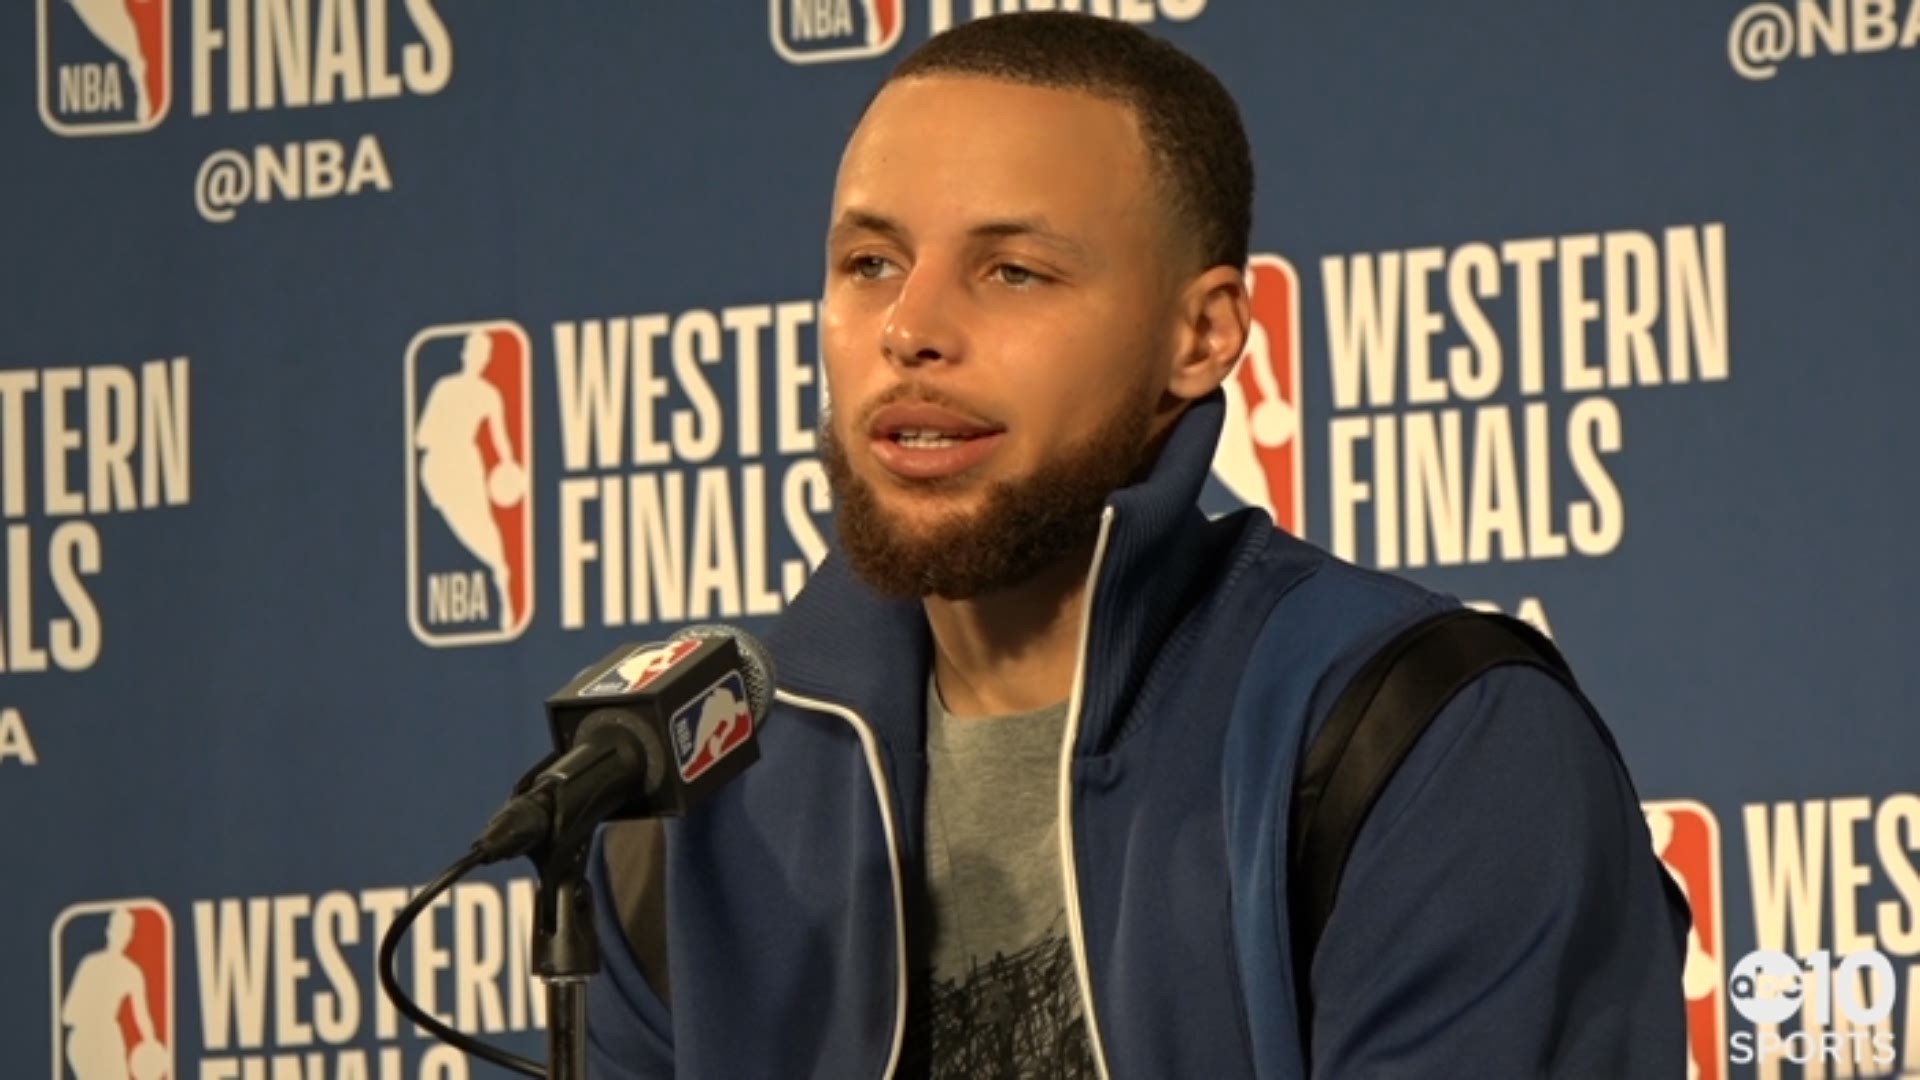 Warriors stars Stephen Curry (left) and Kevin Durant (right) talks about Tuesday's 95-92 loss at home to the Rockets in Game 4 of the Western Conference Finals and heading to Houston with the series tied 2-2.